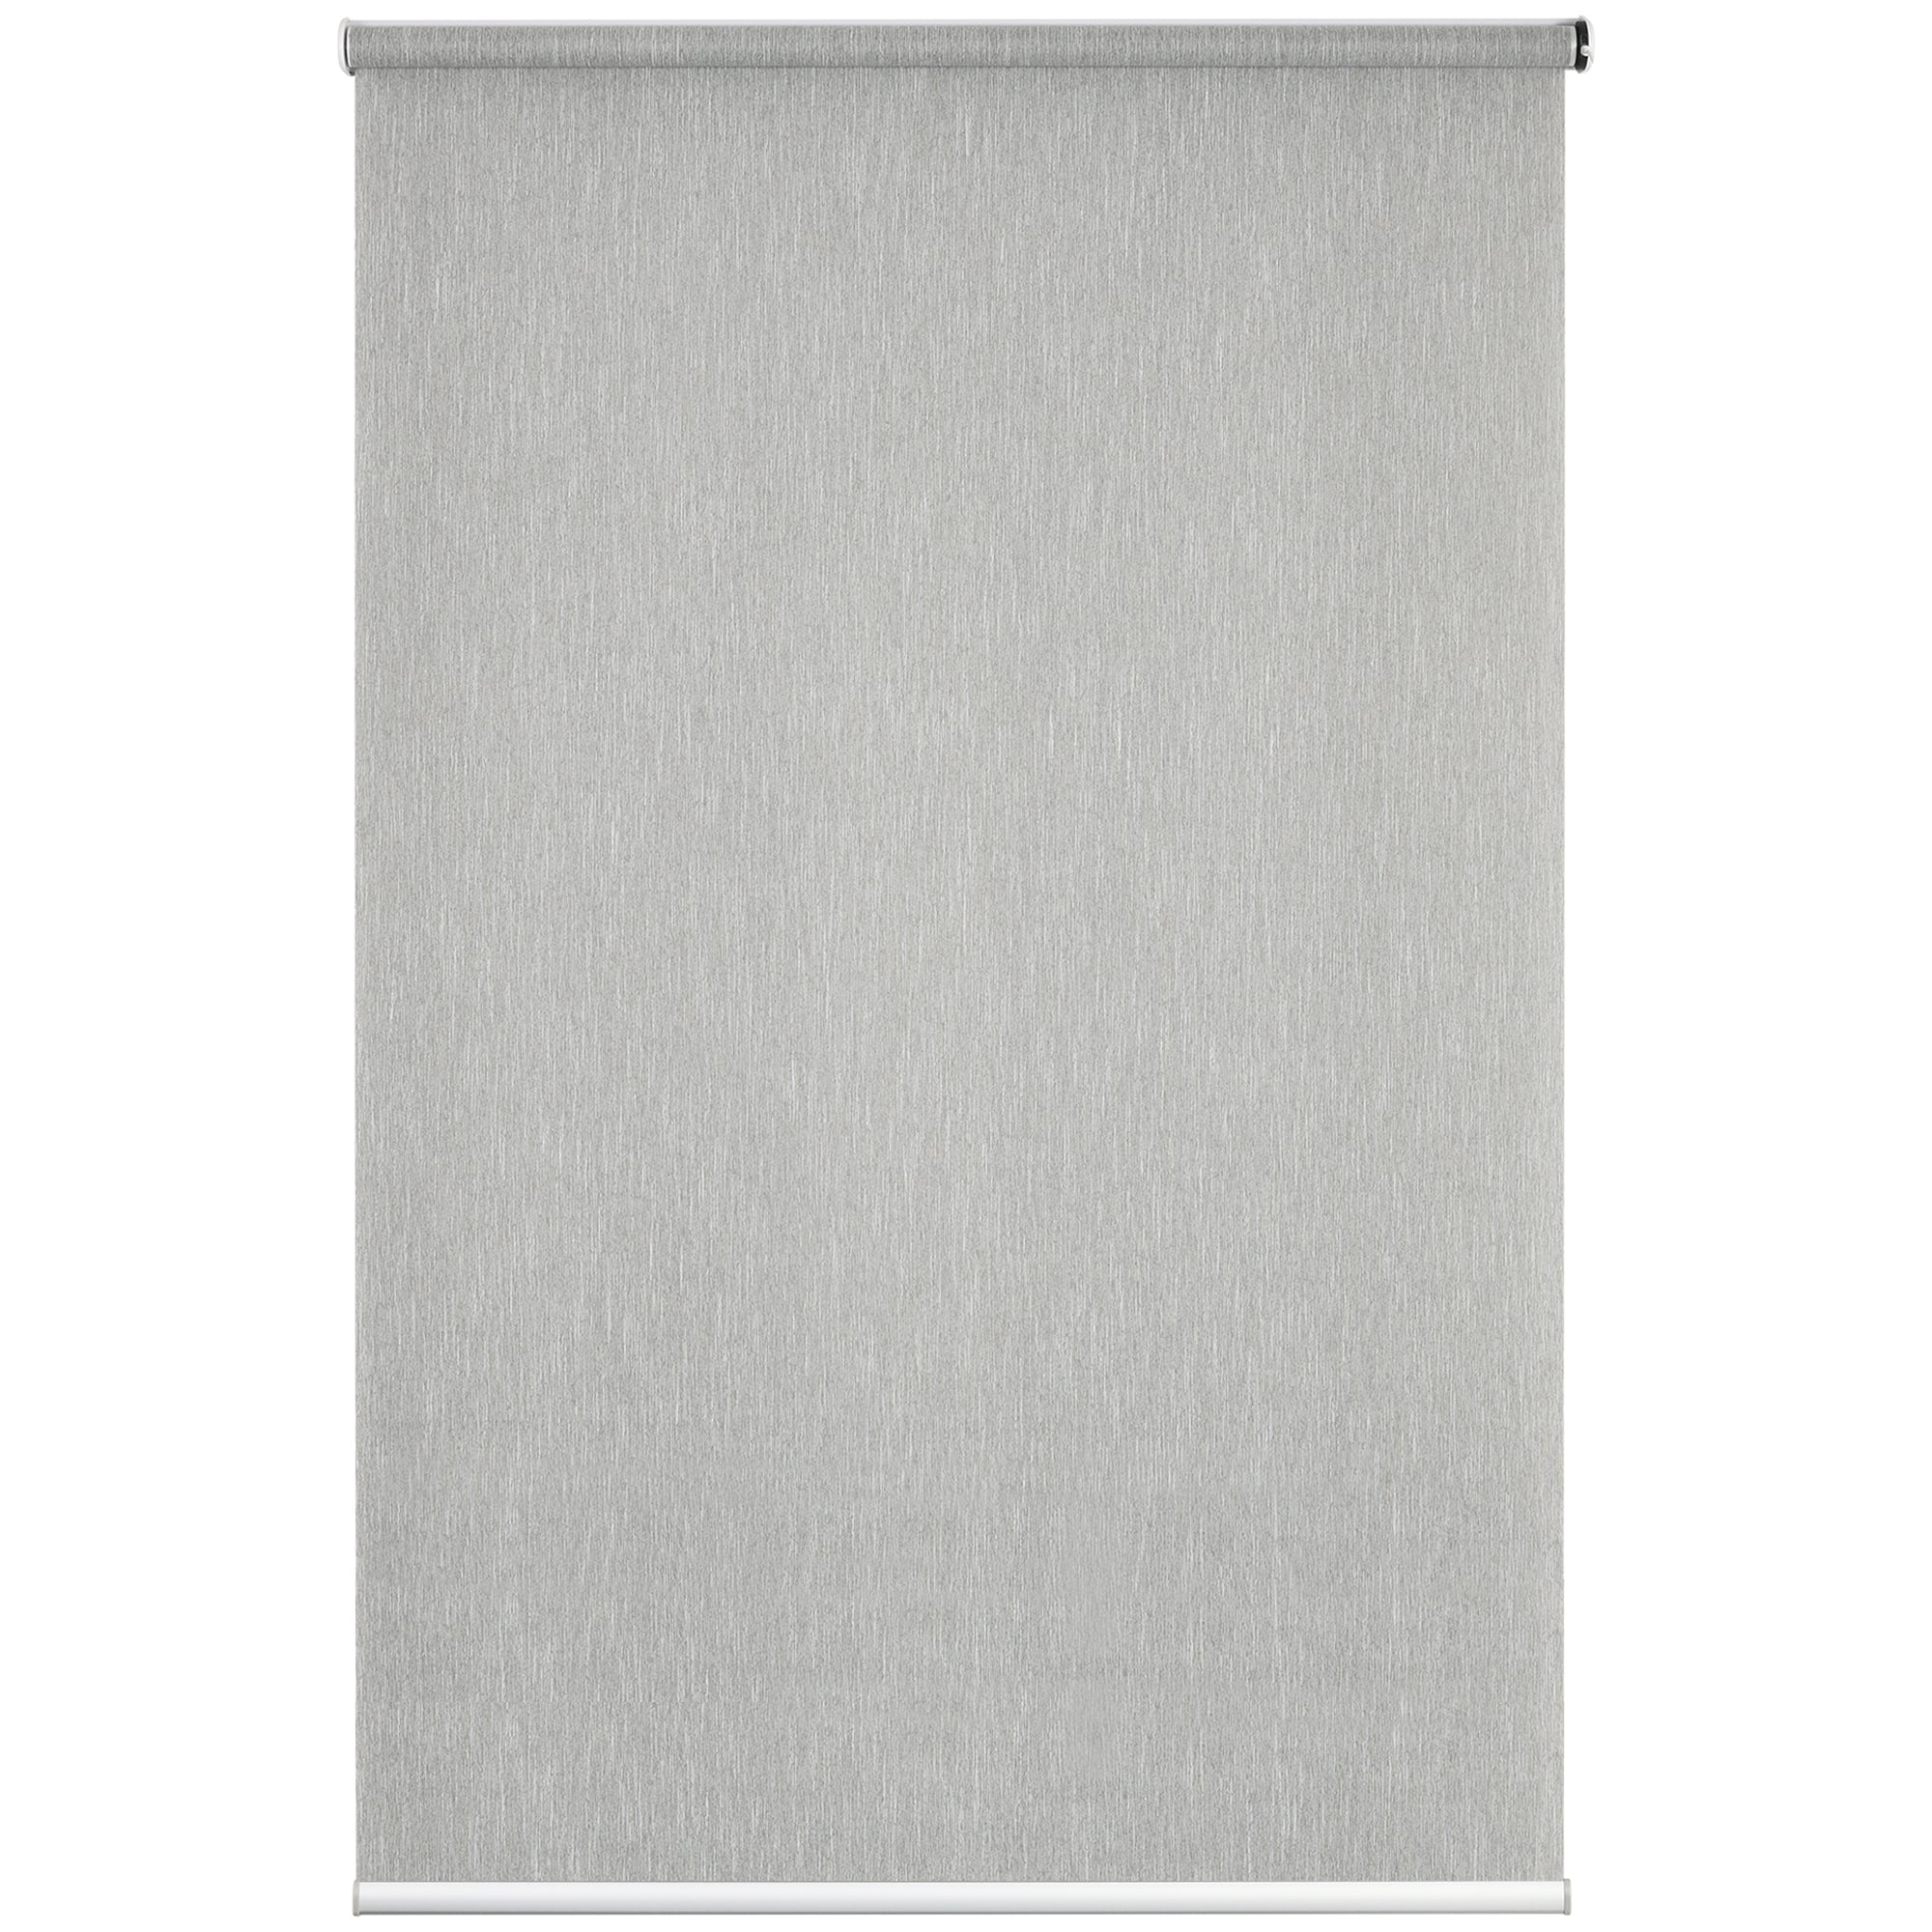 HOMCOM Electric Smart Roller Blinds for Windows with Remote - Grey - 120x180cm  | TJ Hughes